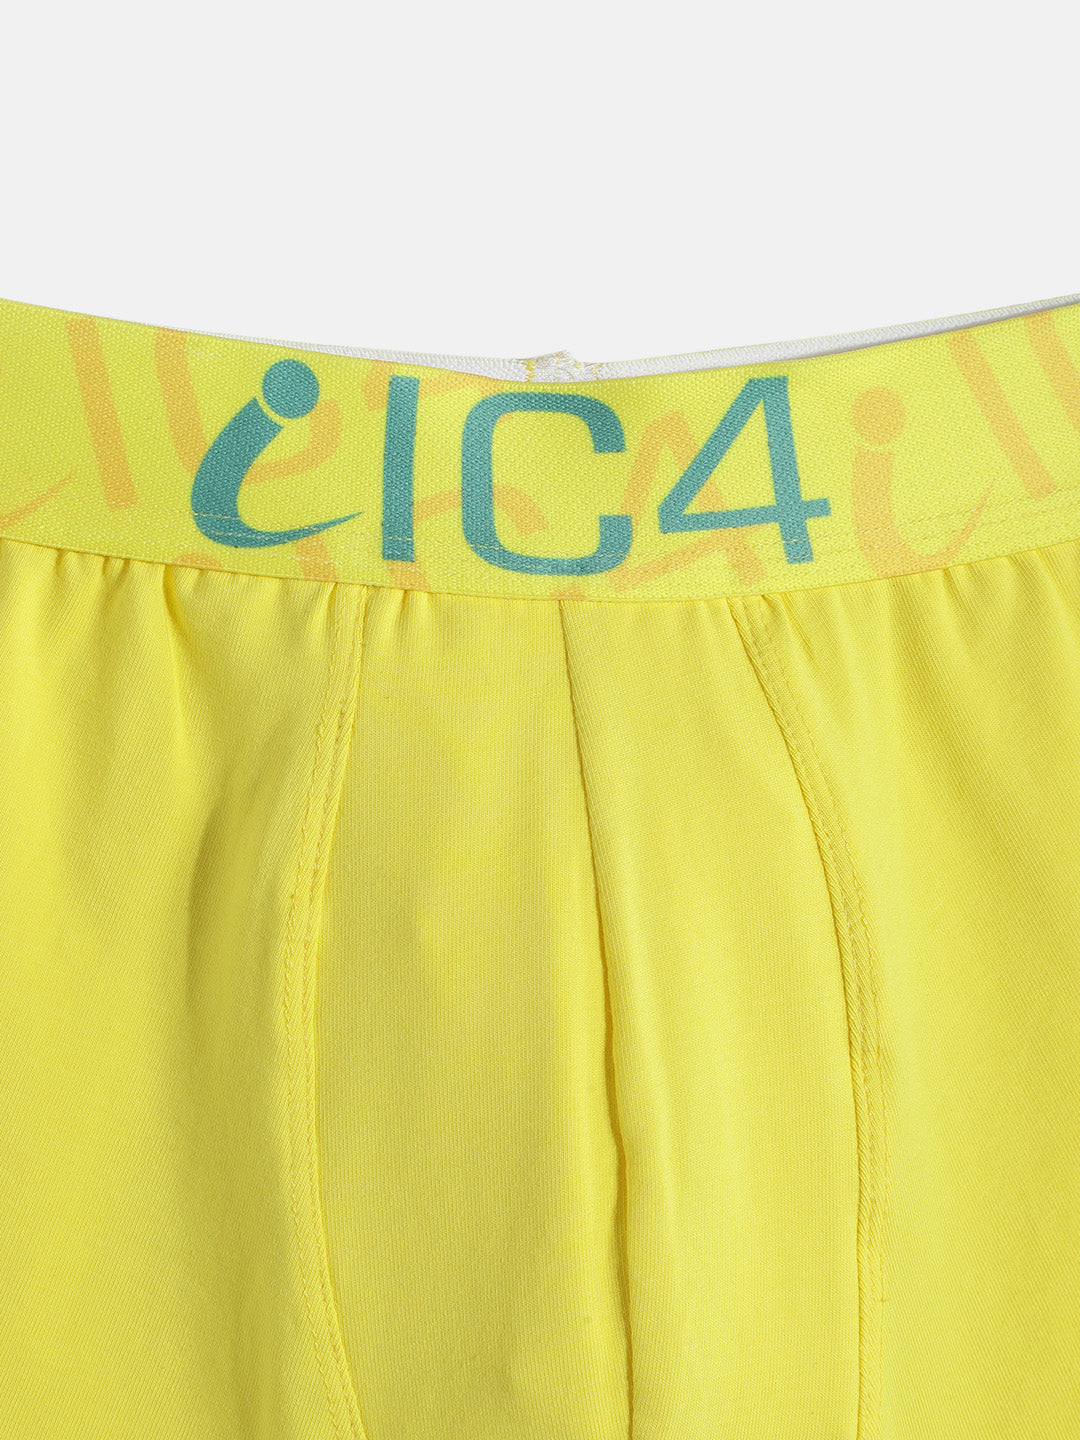 IC4 Boy's Fashion Trunk Combo Pack of 2, Yellow Color